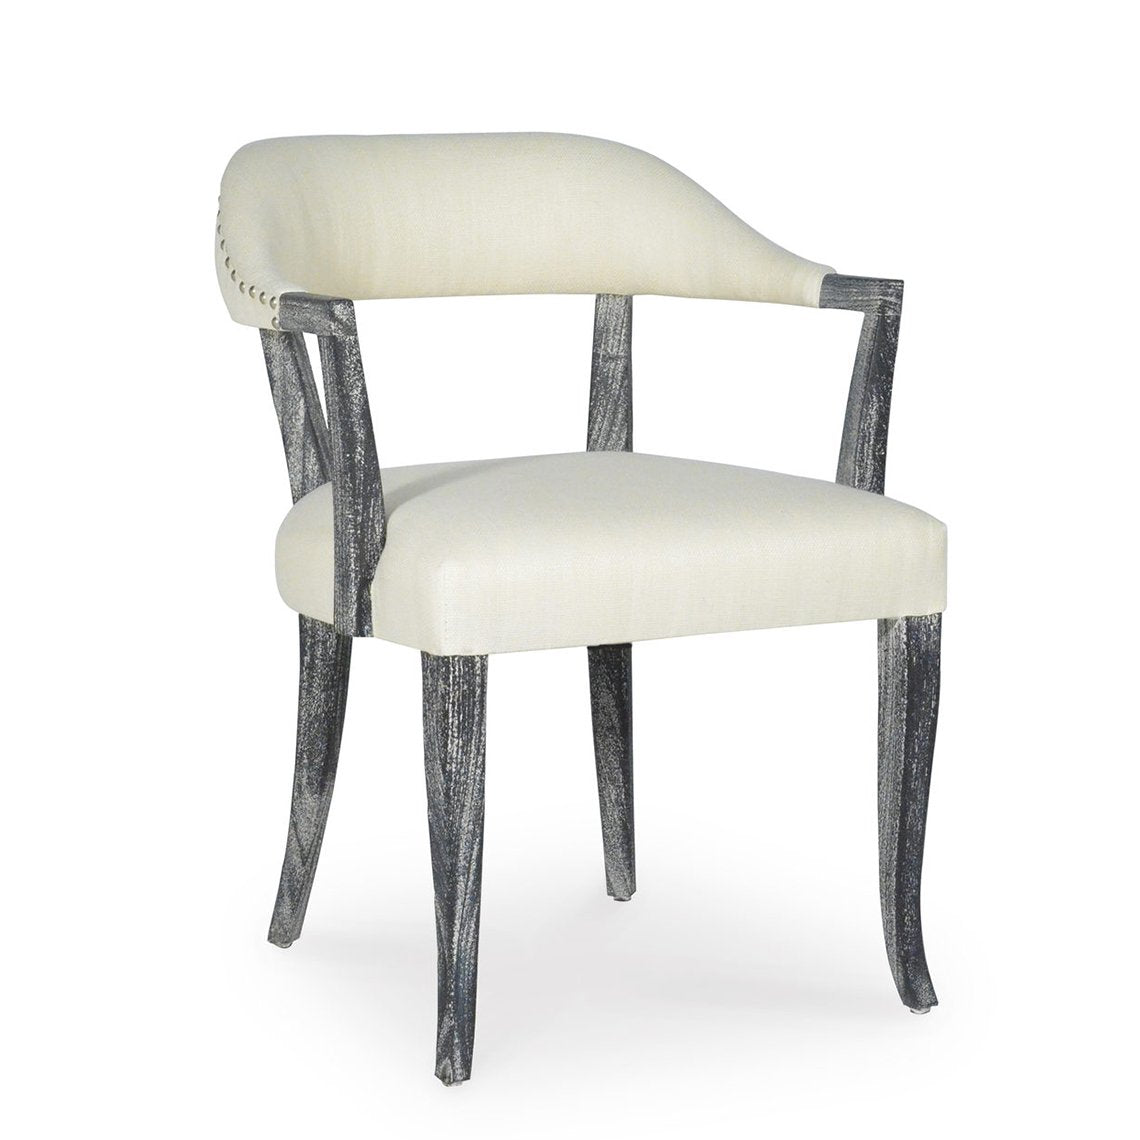 Menlo Chair, Distressed